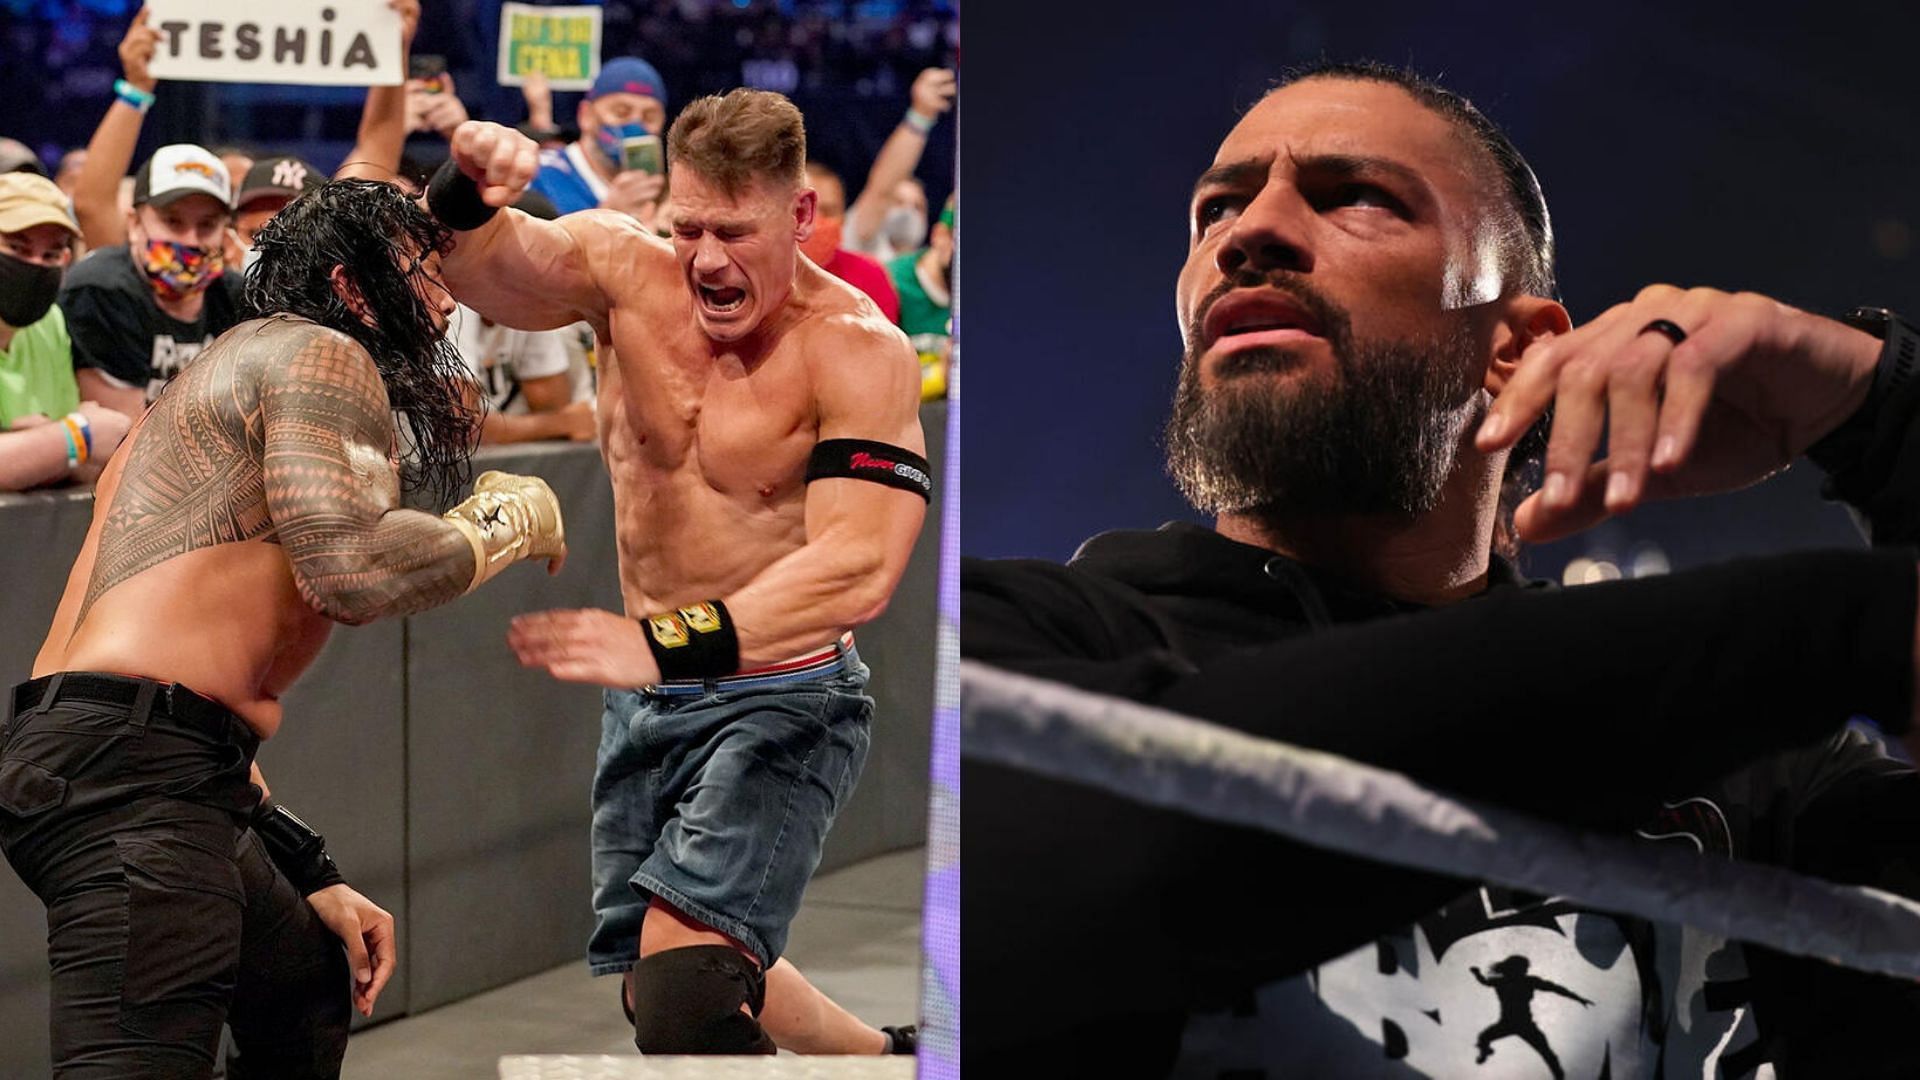 Roman Reigns and John Cena crossed paths in a one-on-one match in 2021